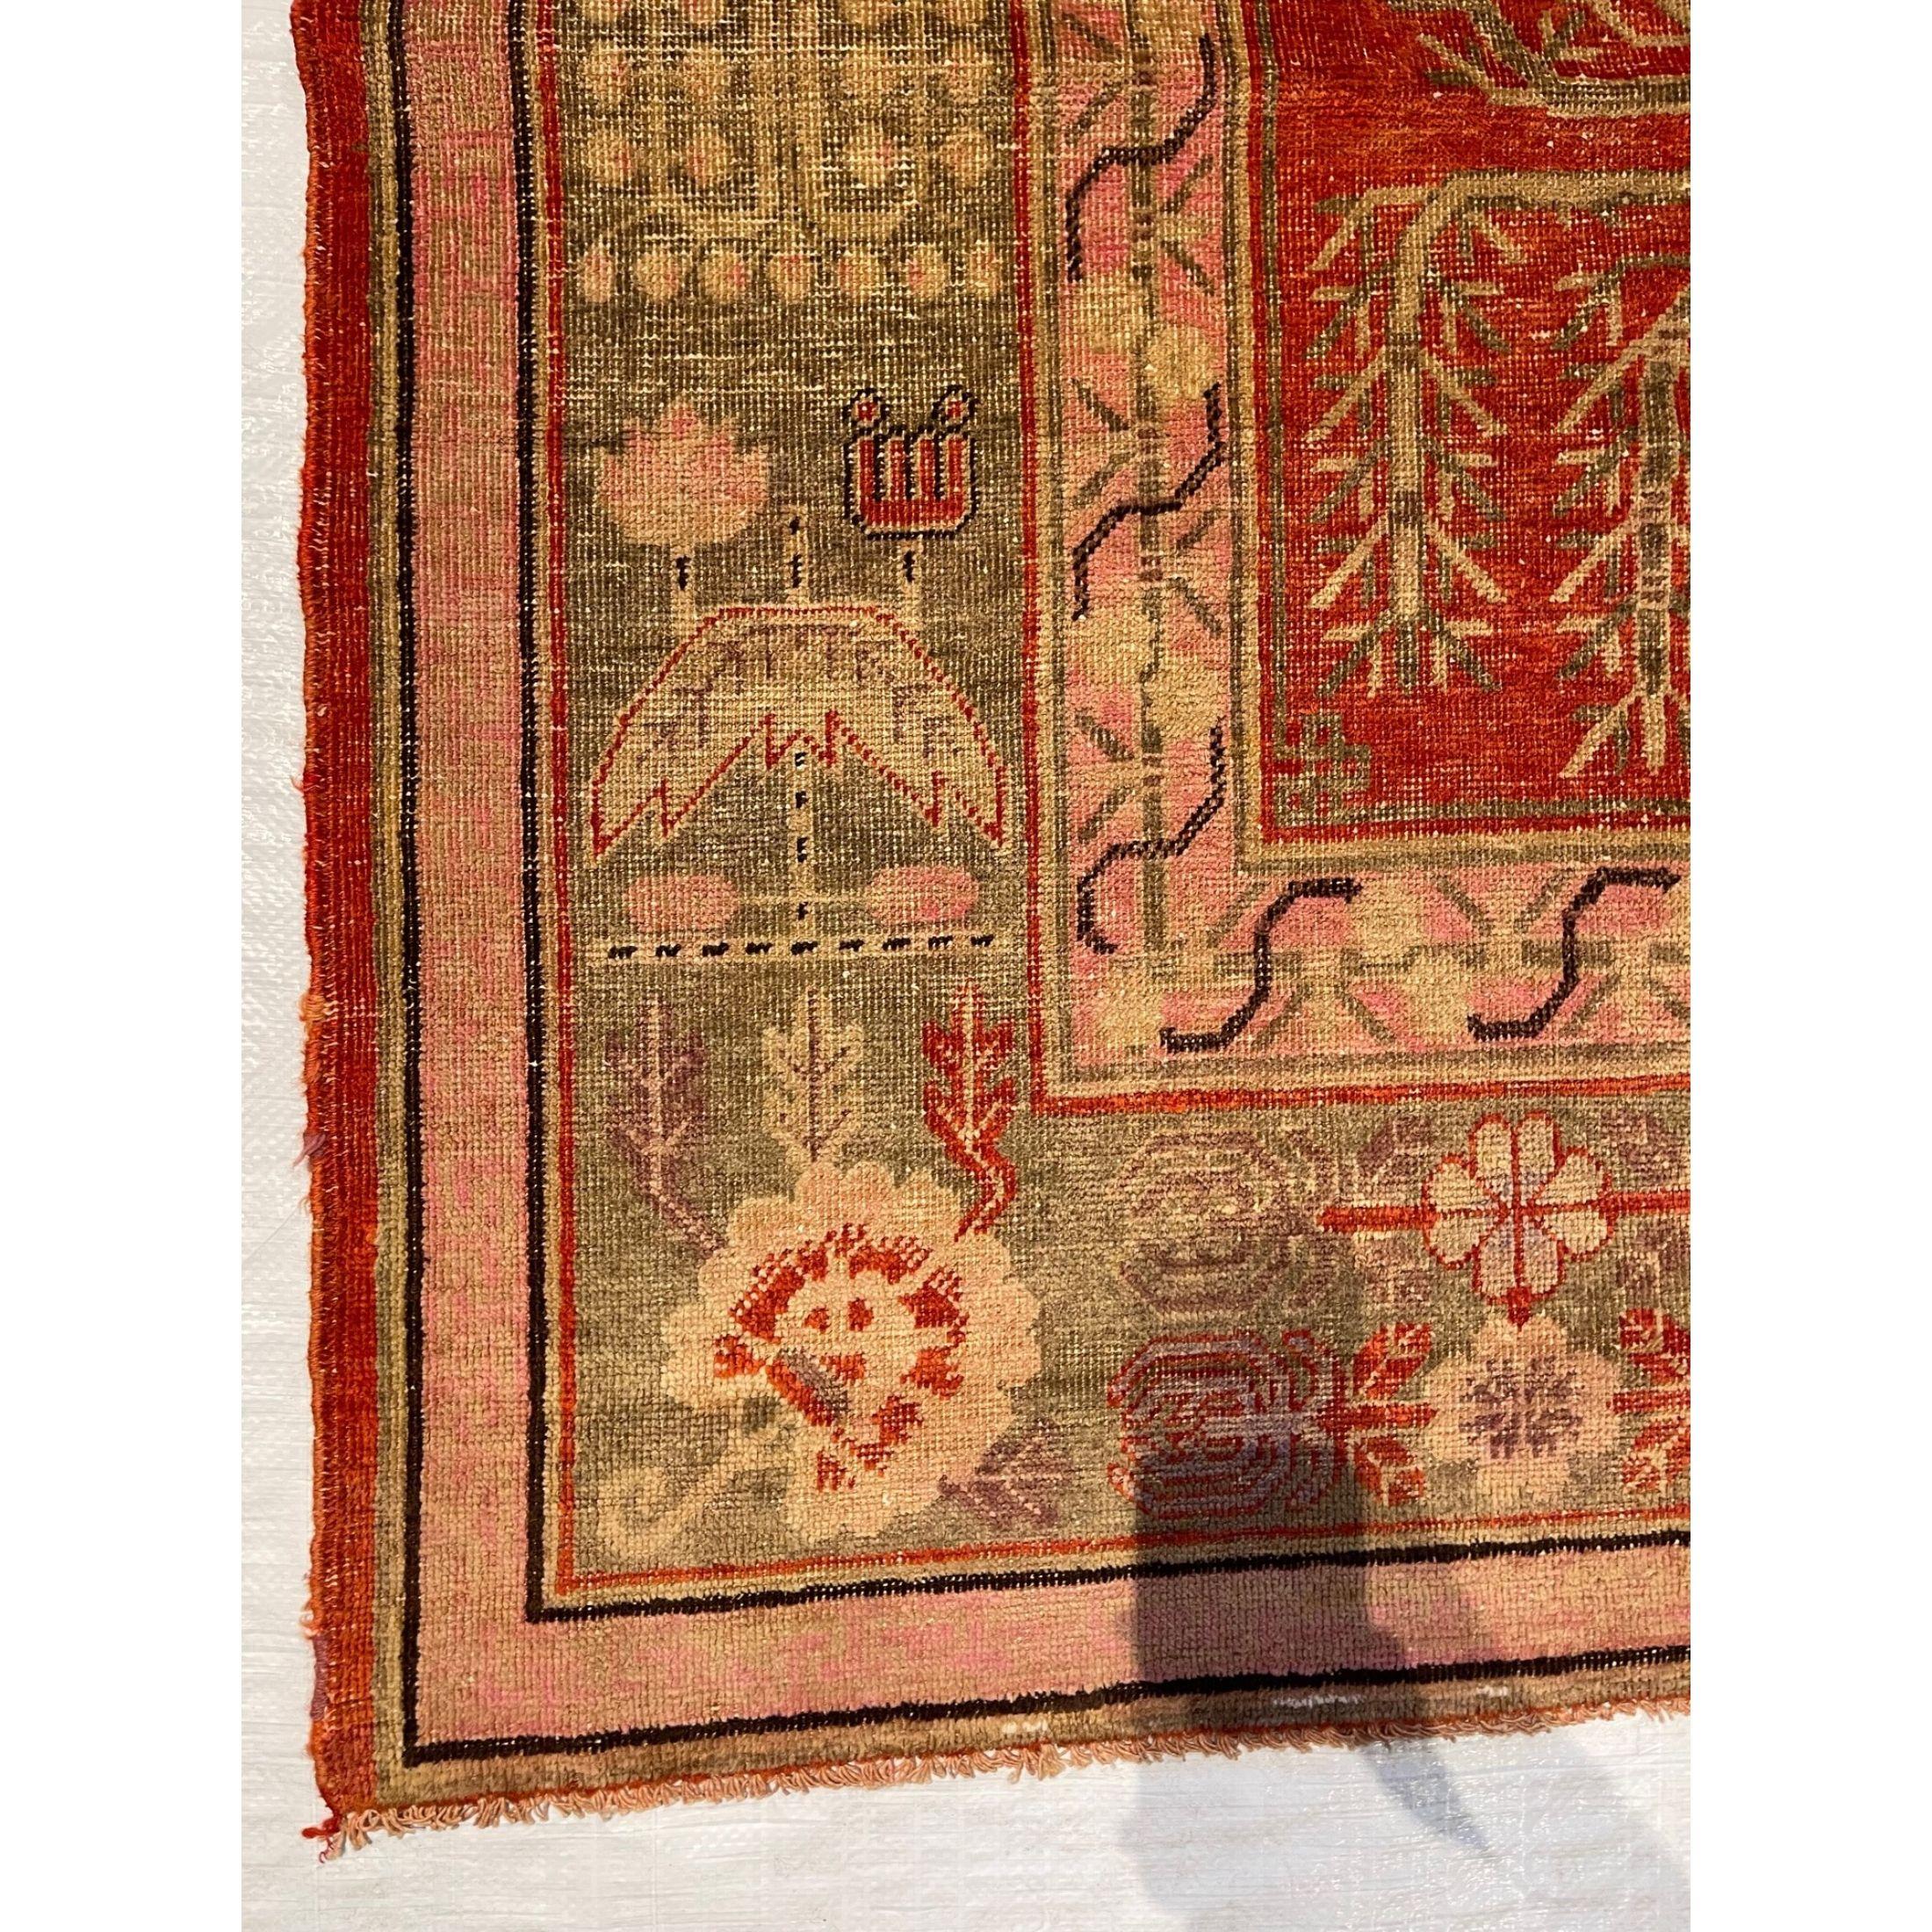 19th Century Vintage Khotan Samarkand Rug In Good Condition For Sale In Los Angeles, US